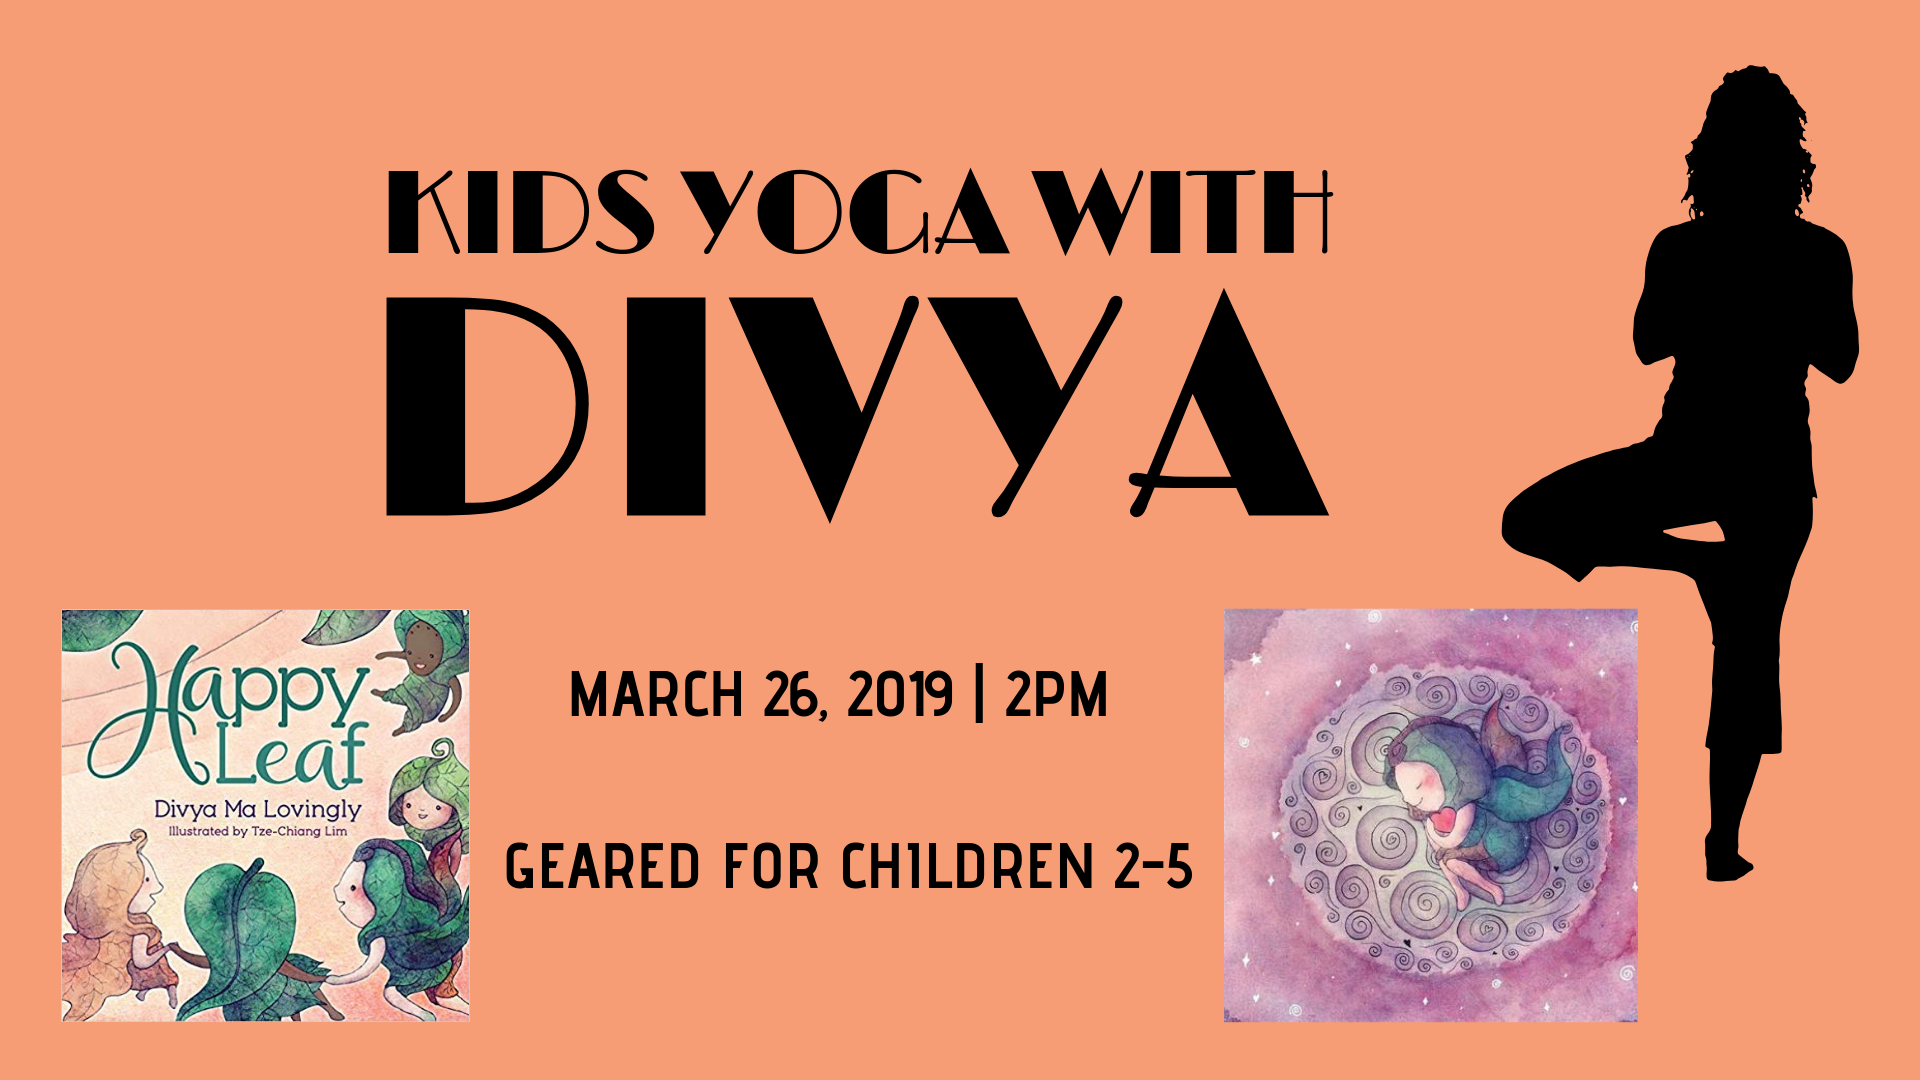 Kids Yoga with Divya and the cover of the book Happy Leaf. 